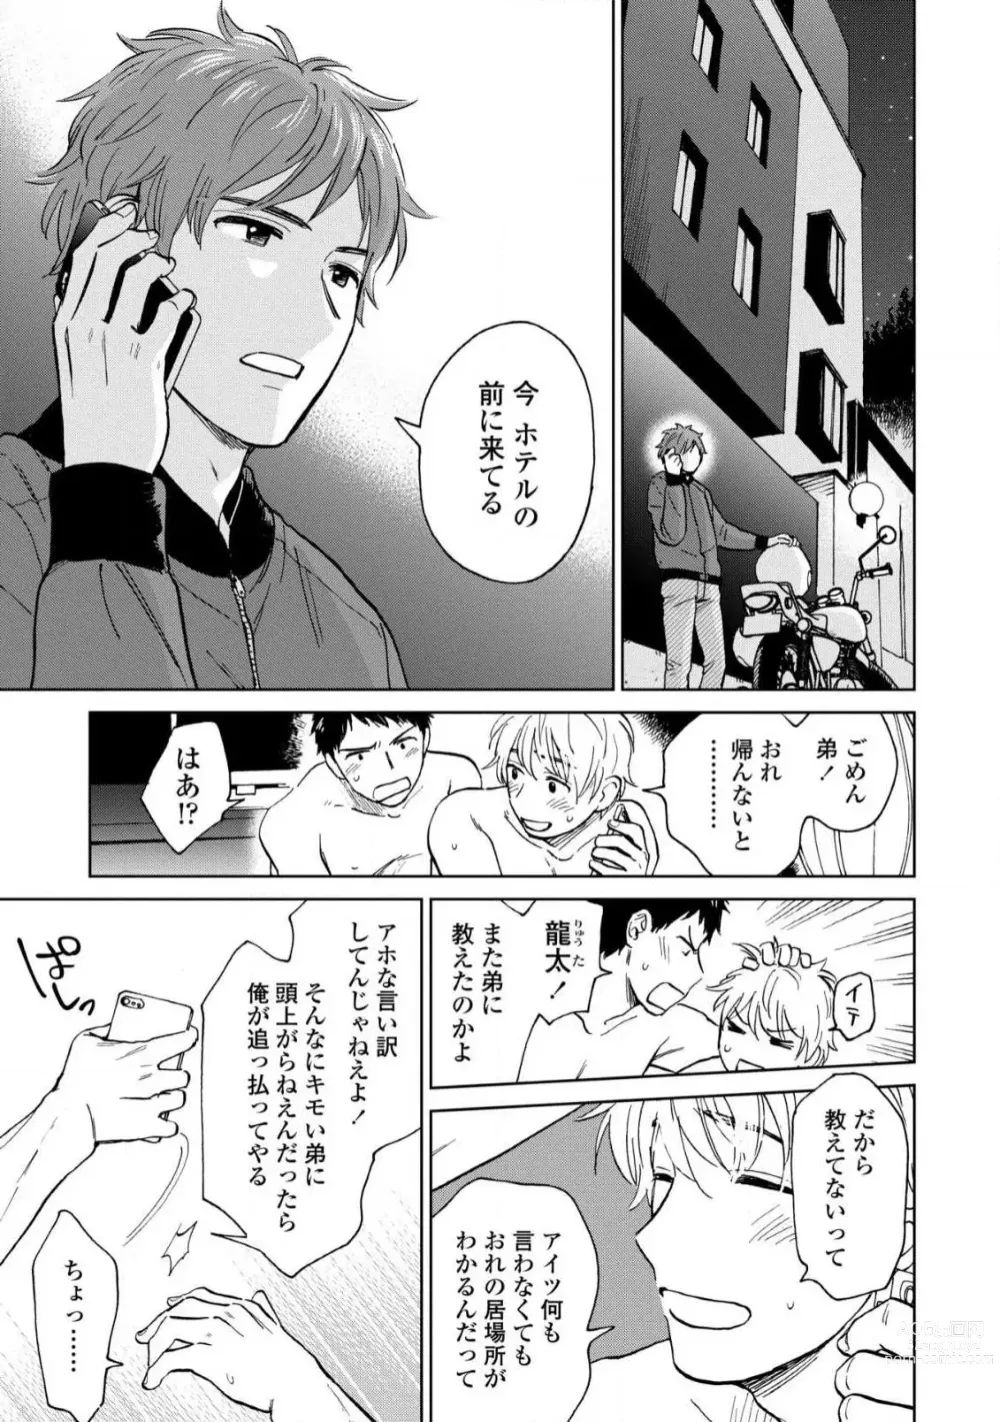 Page 7 of manga Magnet Kyoudai - Magnet Brothers